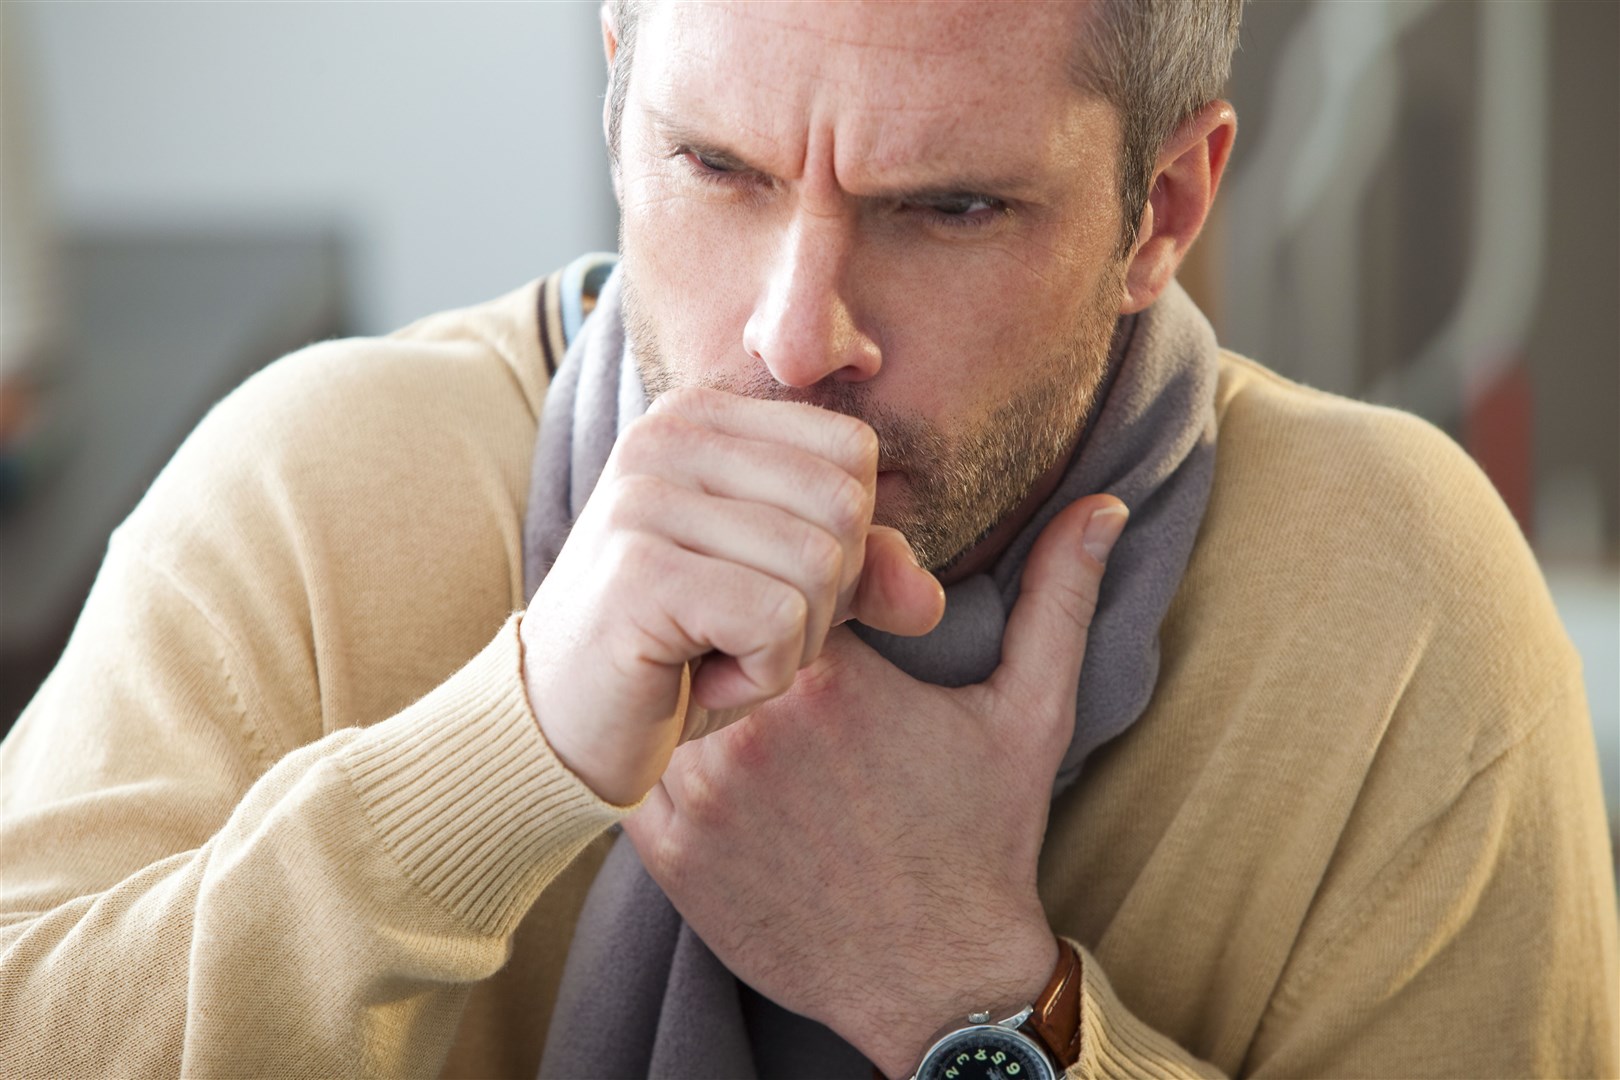 A persistent cough over three weeks should definitely be checked out.